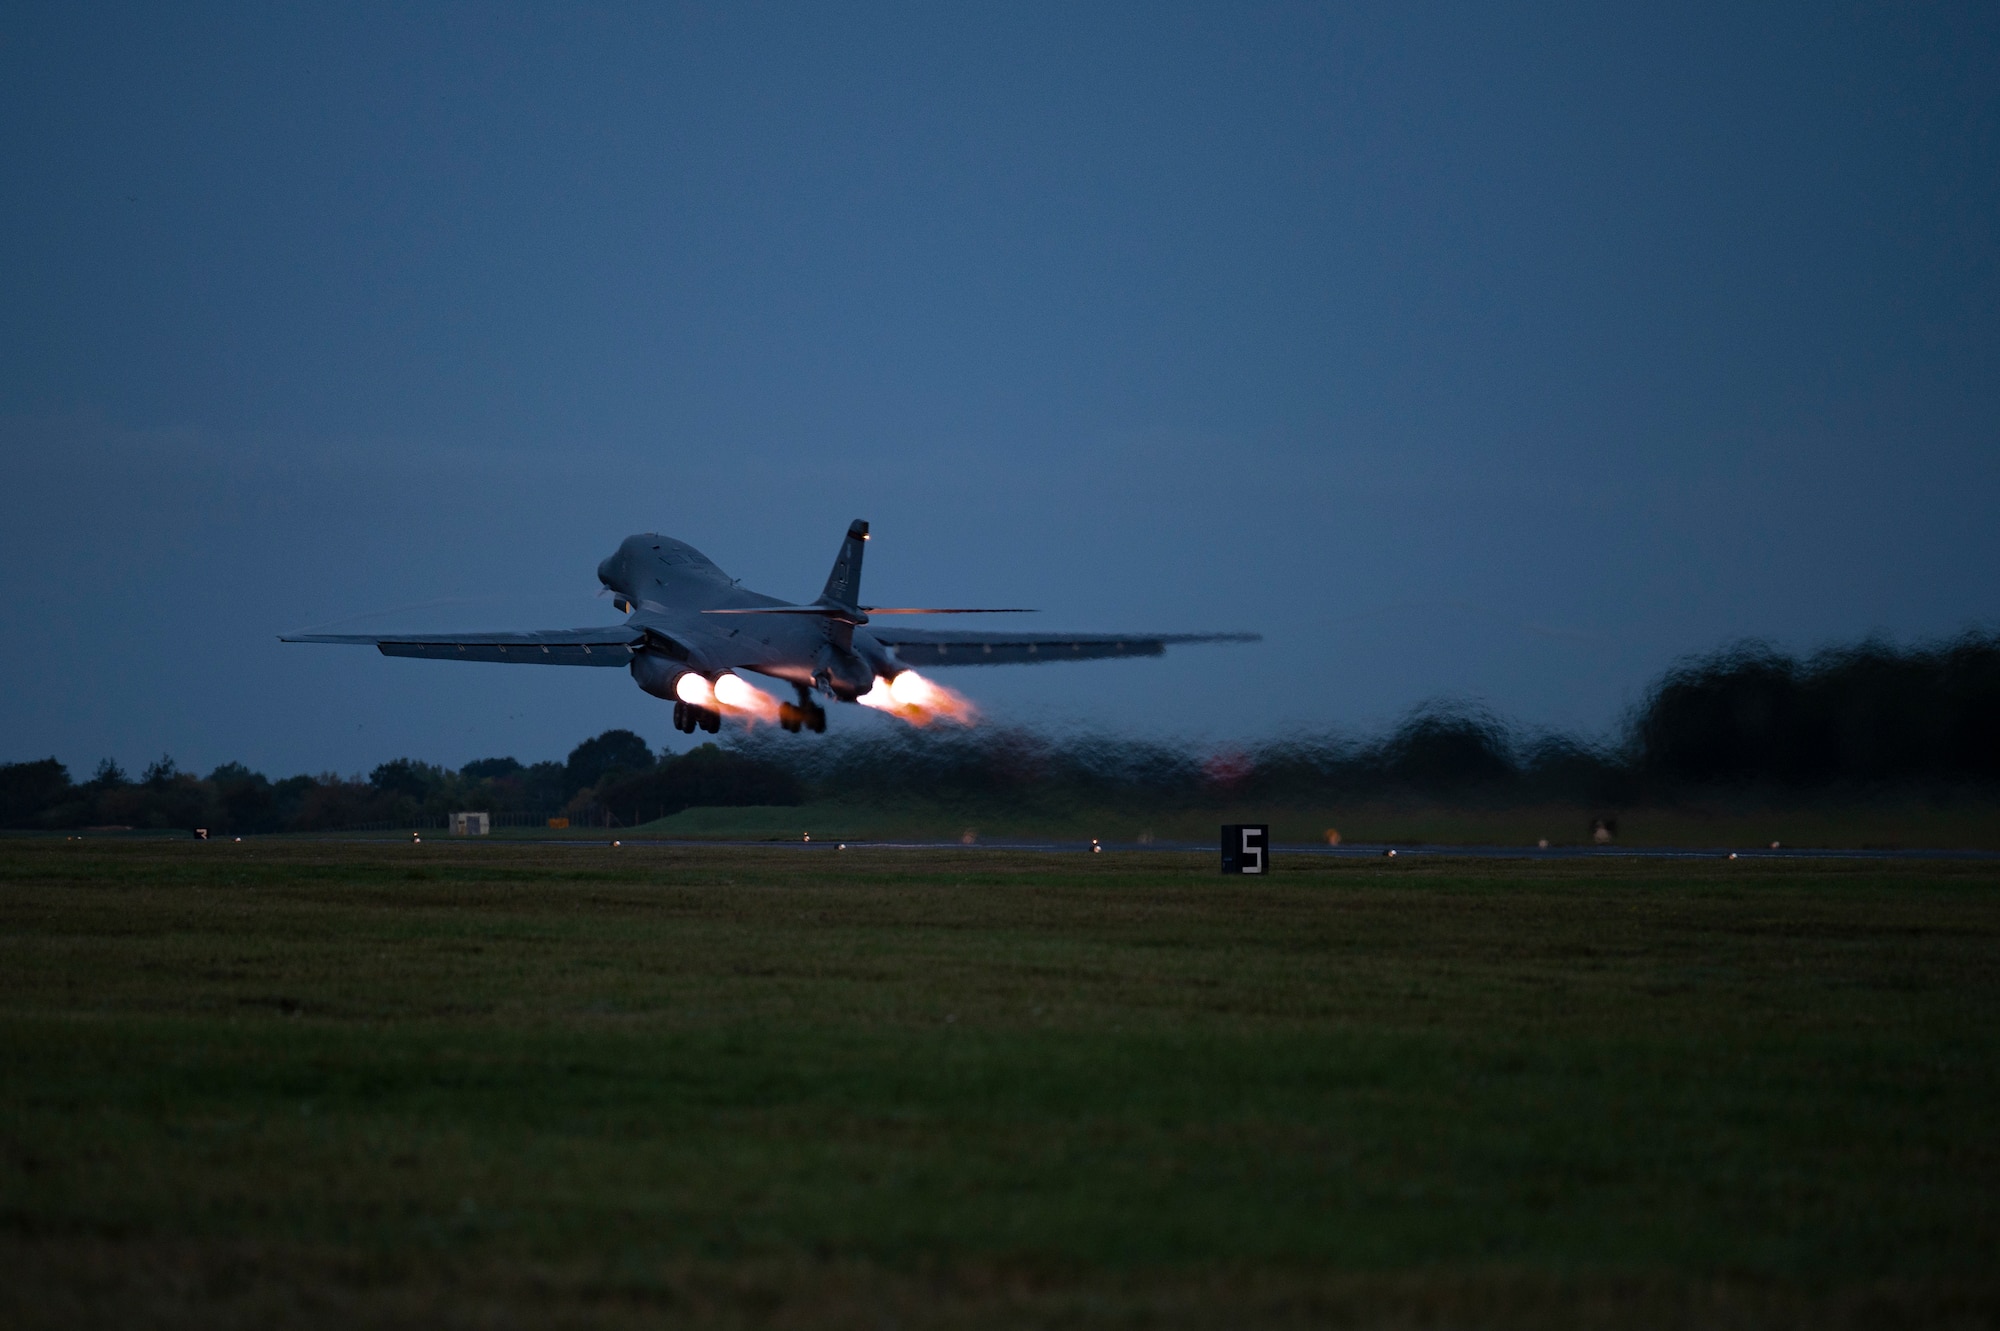 A B-1B Lancer assigned to the 9th Expeditionary Bomb Squadron takes off at RAF Fairford, United Kingdom, to conduct a Bomber Task Force Europe mission, Oct. 11, 2021. BTF Europe missions allow aircrew to routinely integrate and train with ally and partner forces, enhancing operational coordination and interoperability. (U.S. Air Force photo by Senior Airman Colin Hollowell)